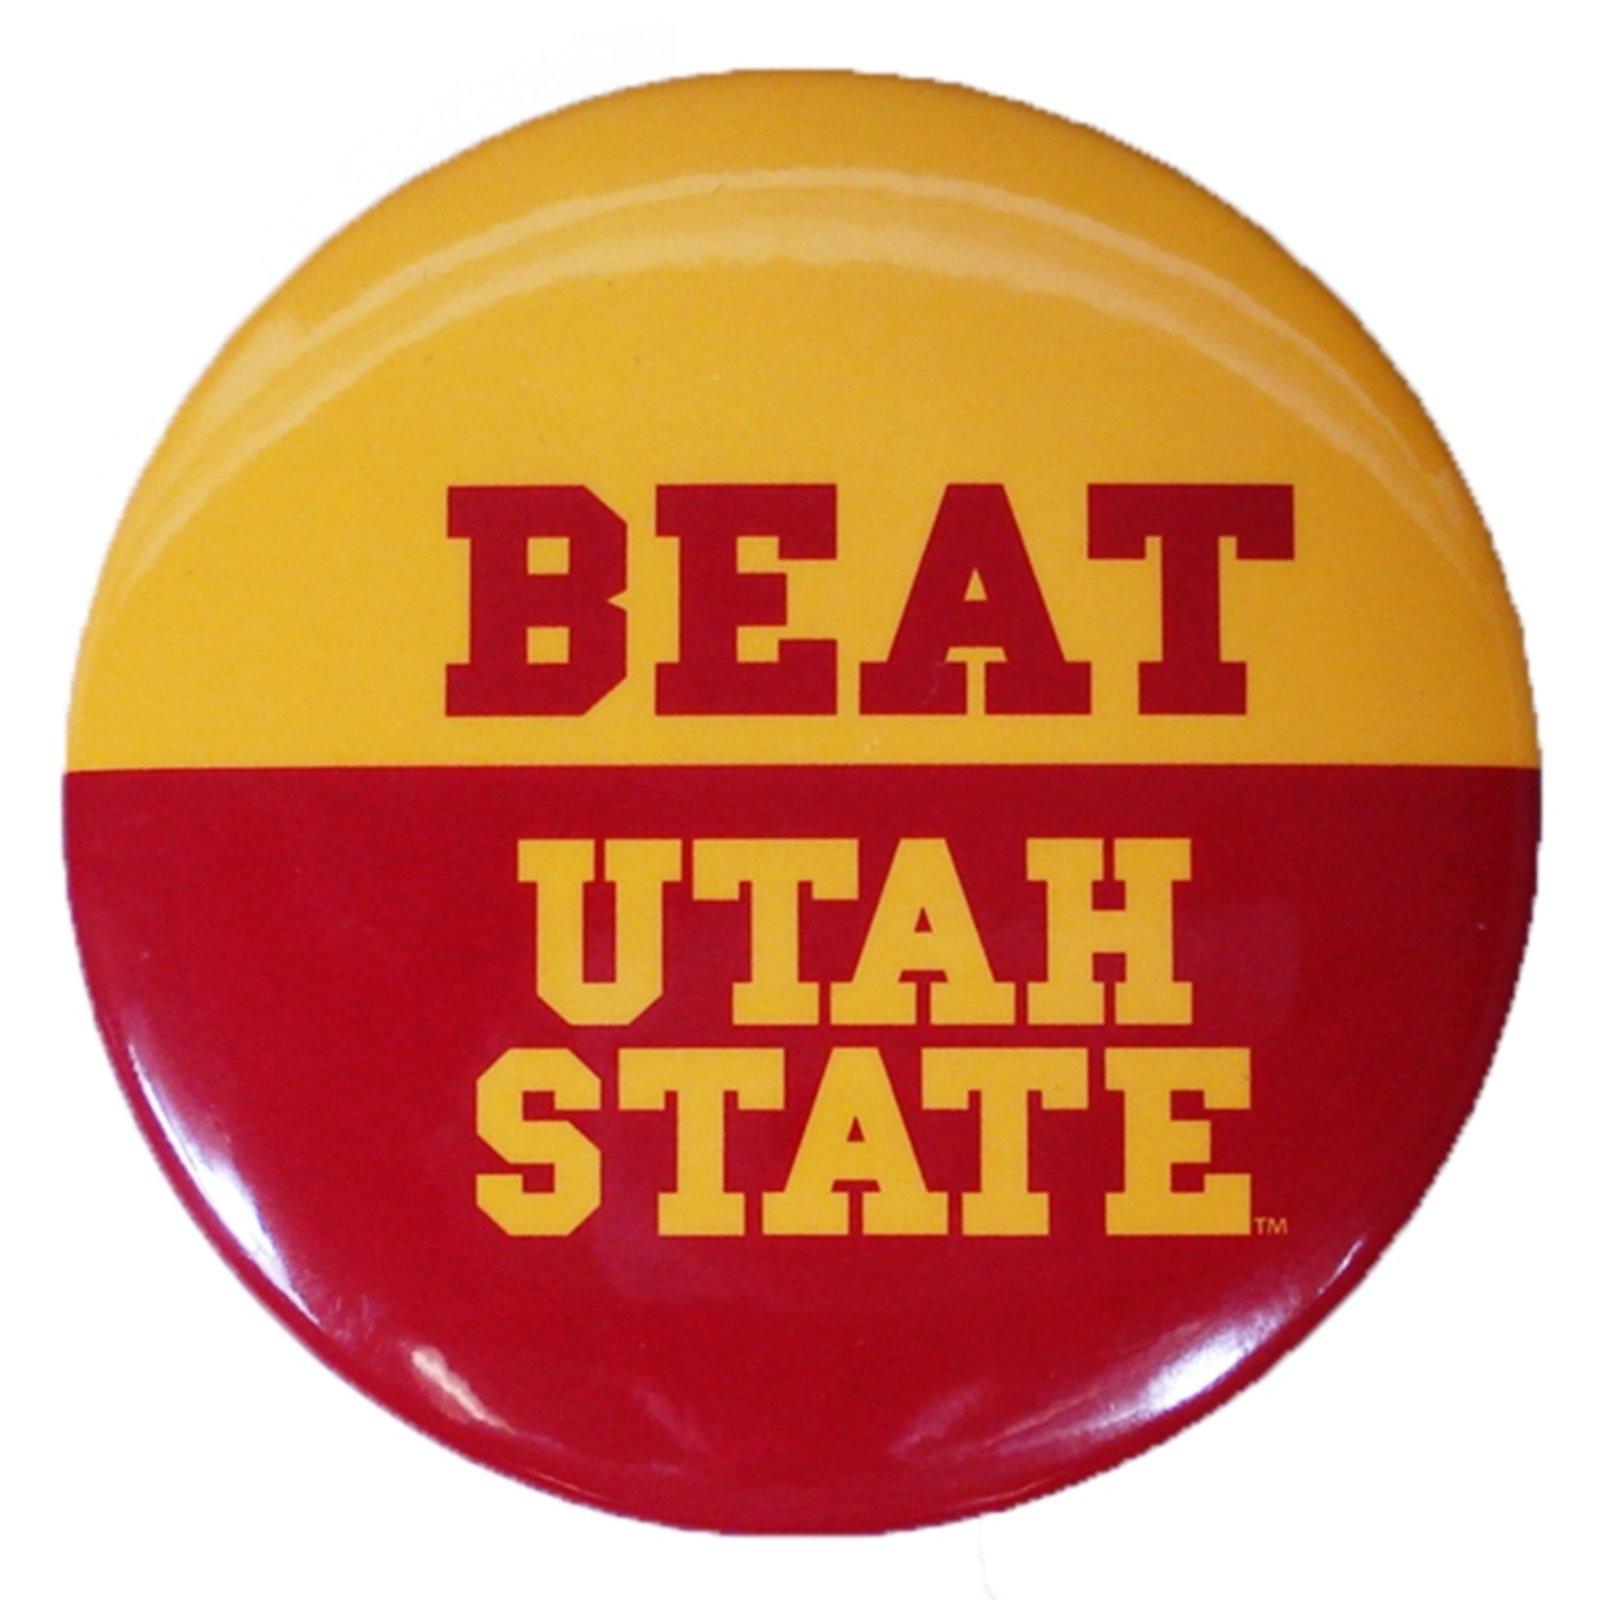 USC BEAT UTAH STATE BUTTON C&G BY THE U GIFT image01